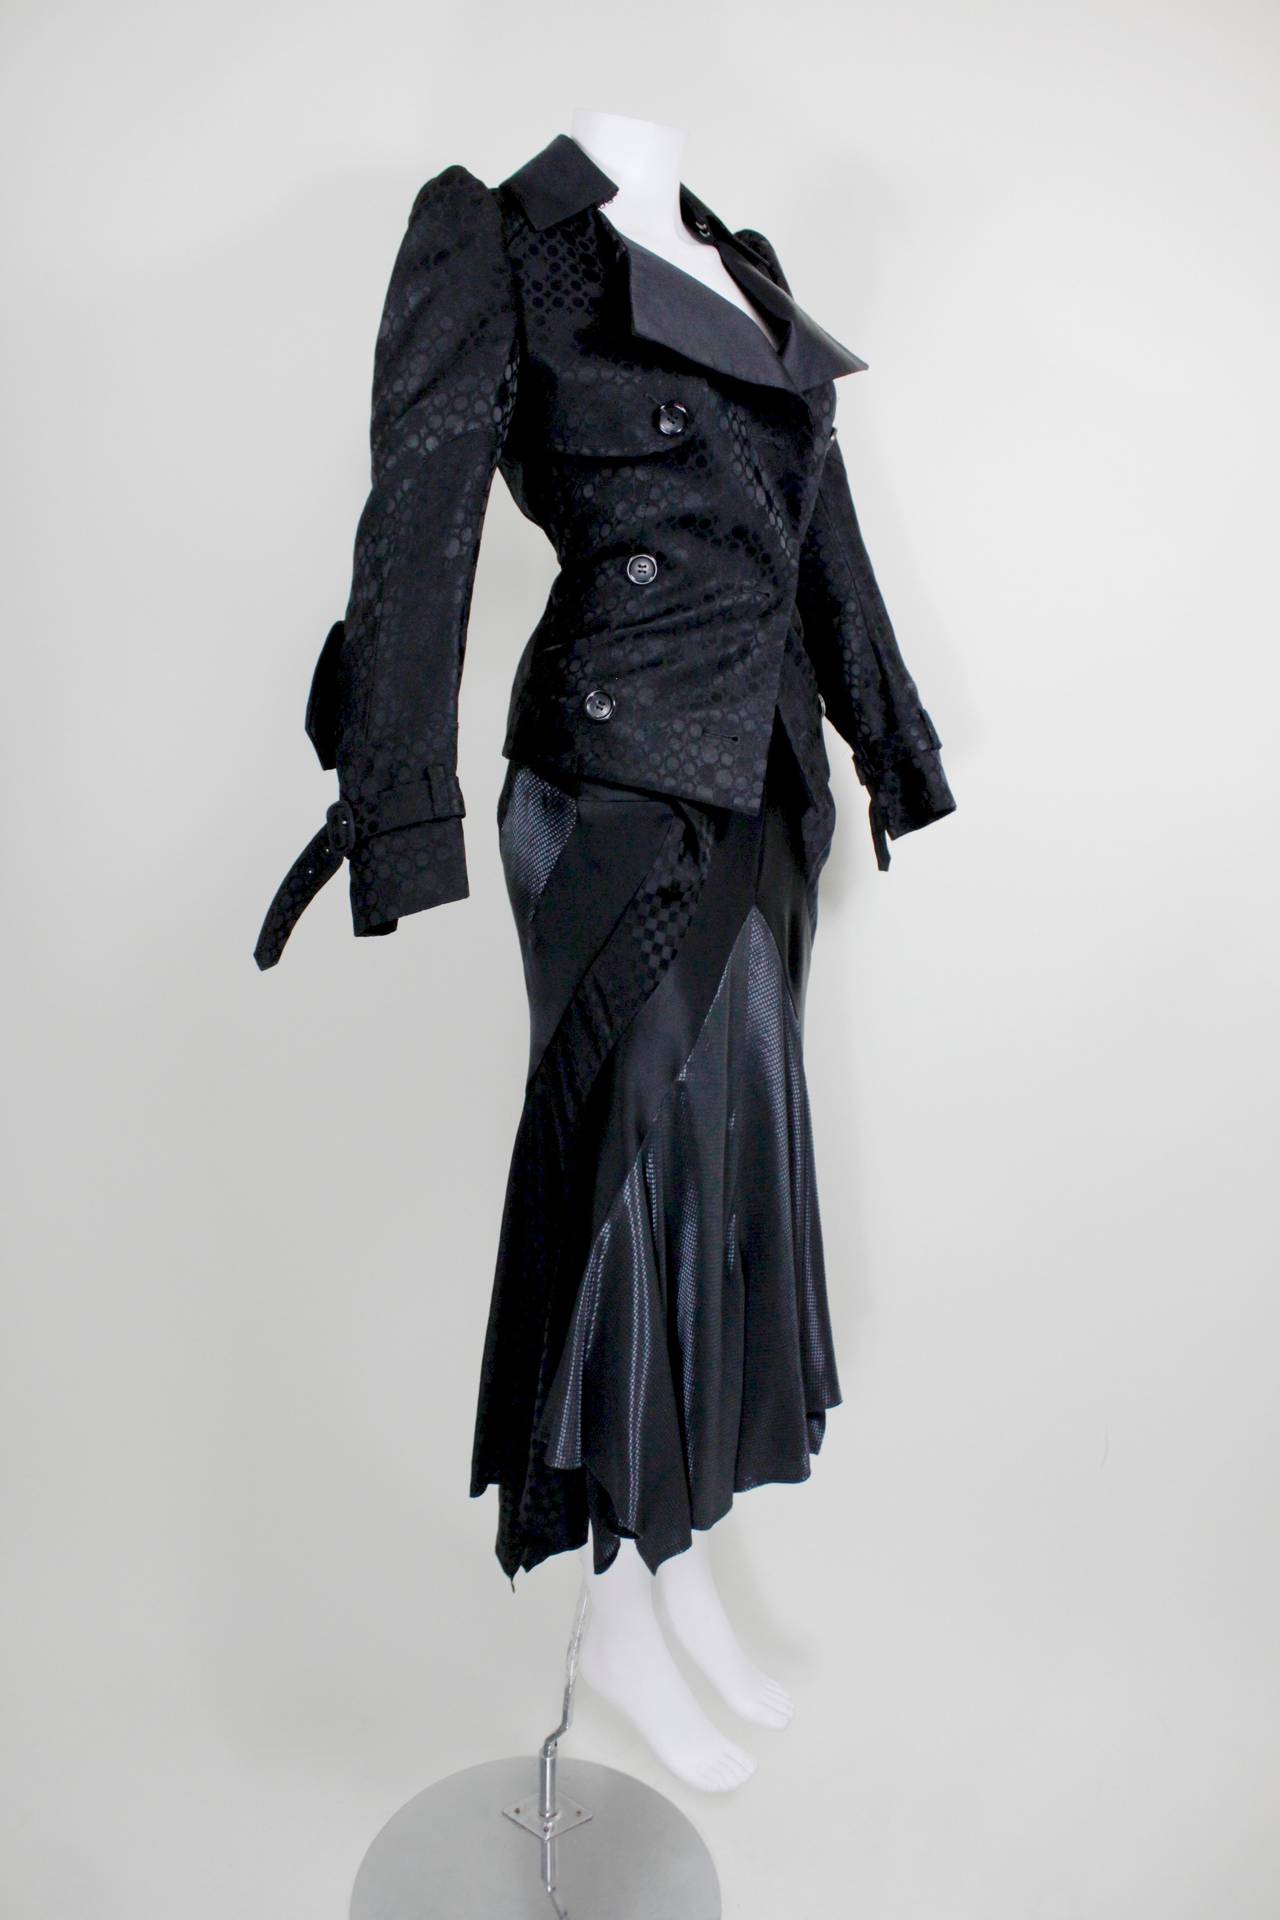 Junya Watanabe for Comme des Garçons Black Asymmetrical Ensemble In Excellent Condition For Sale In Los Angeles, CA